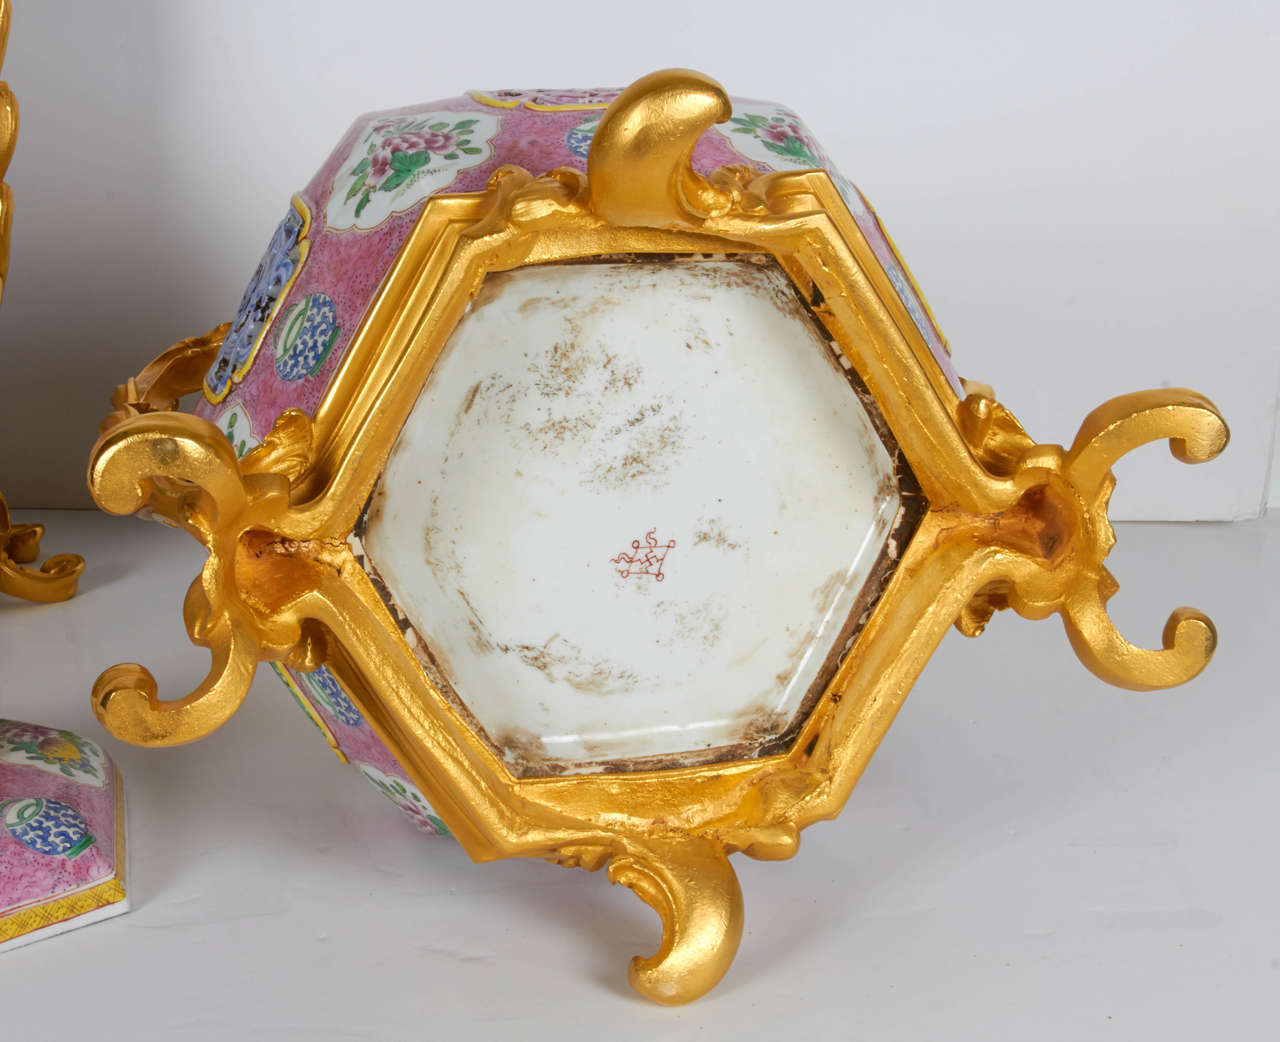 French Pair of Antique Chinese Export Porcelain and Ormolu-Mounted Covered Potpourris